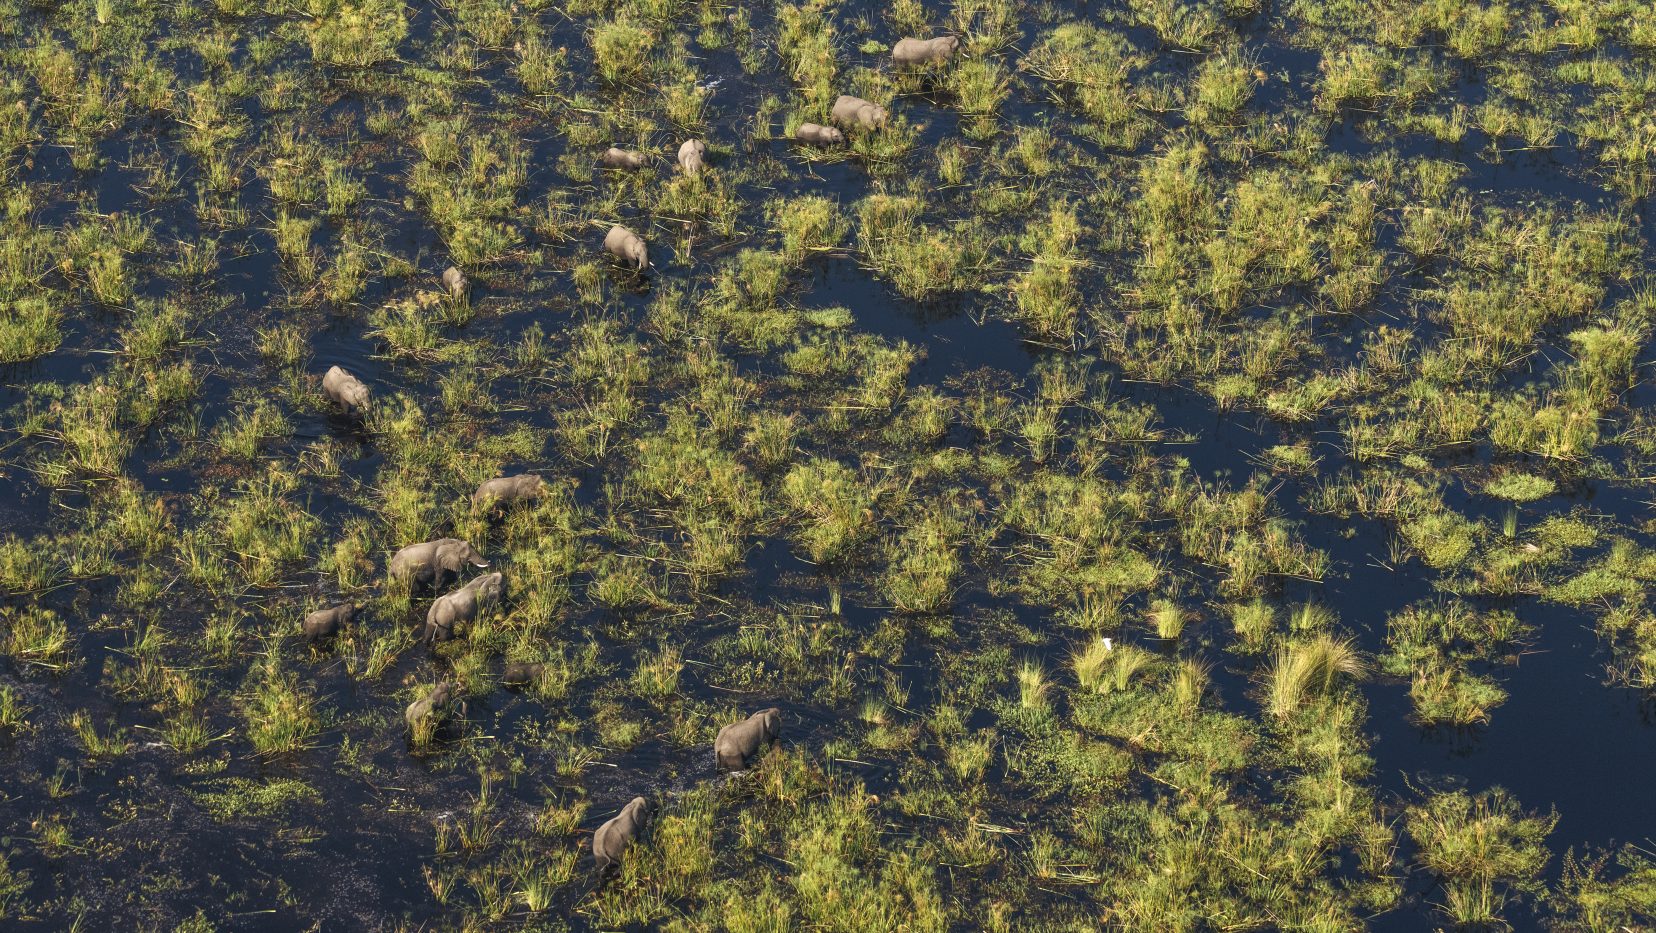 View of elephants in the Okavango as seen from above in a helicoptor